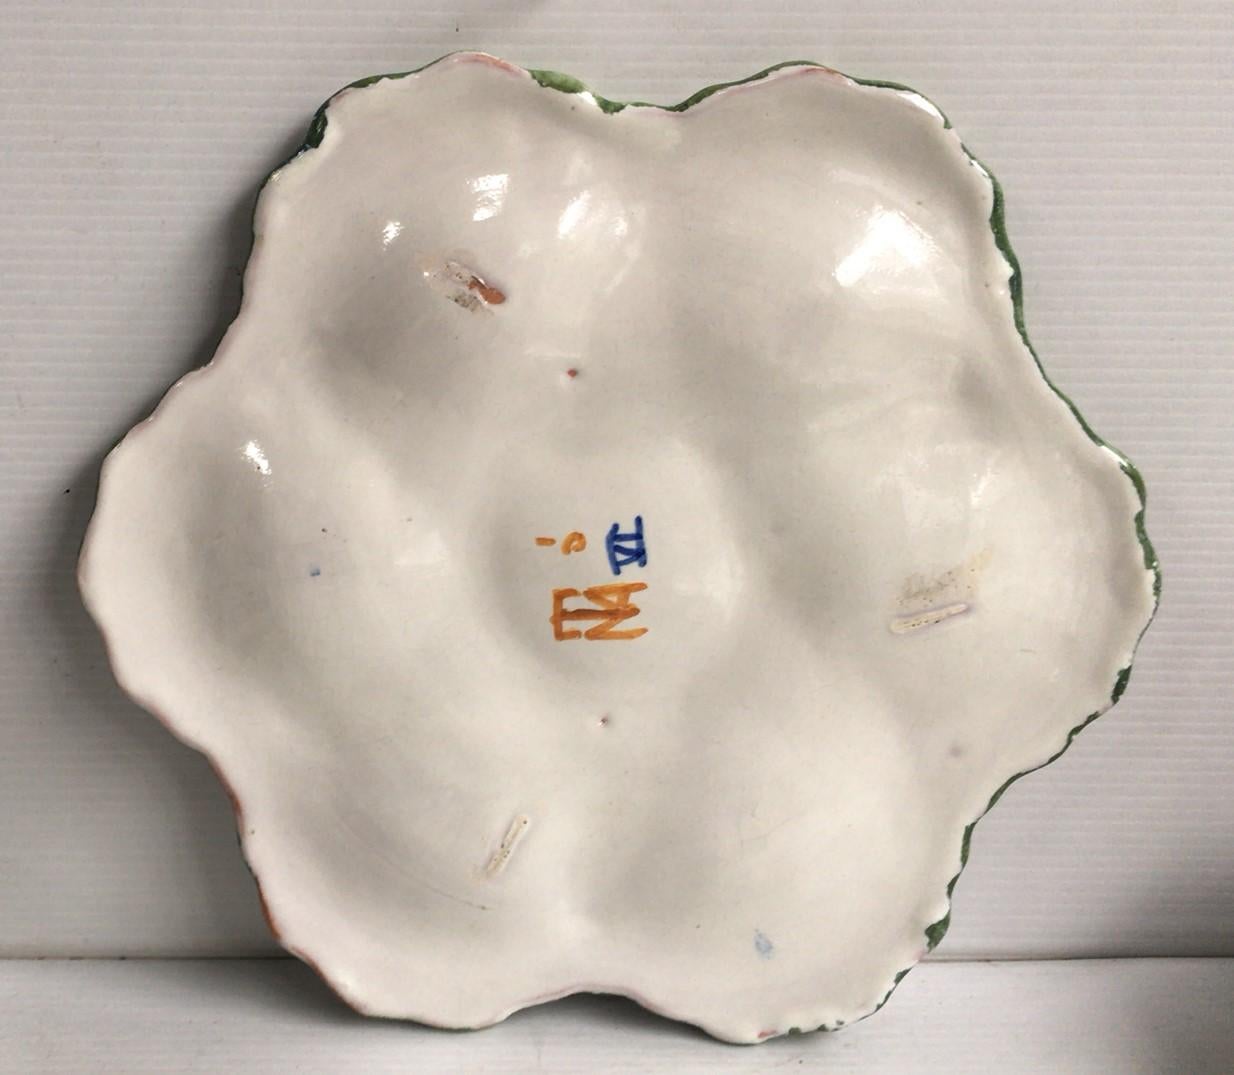 French Faience rustic oyster plate Moustiers style, circa 1940.
Painting of flowers and bird on the center.